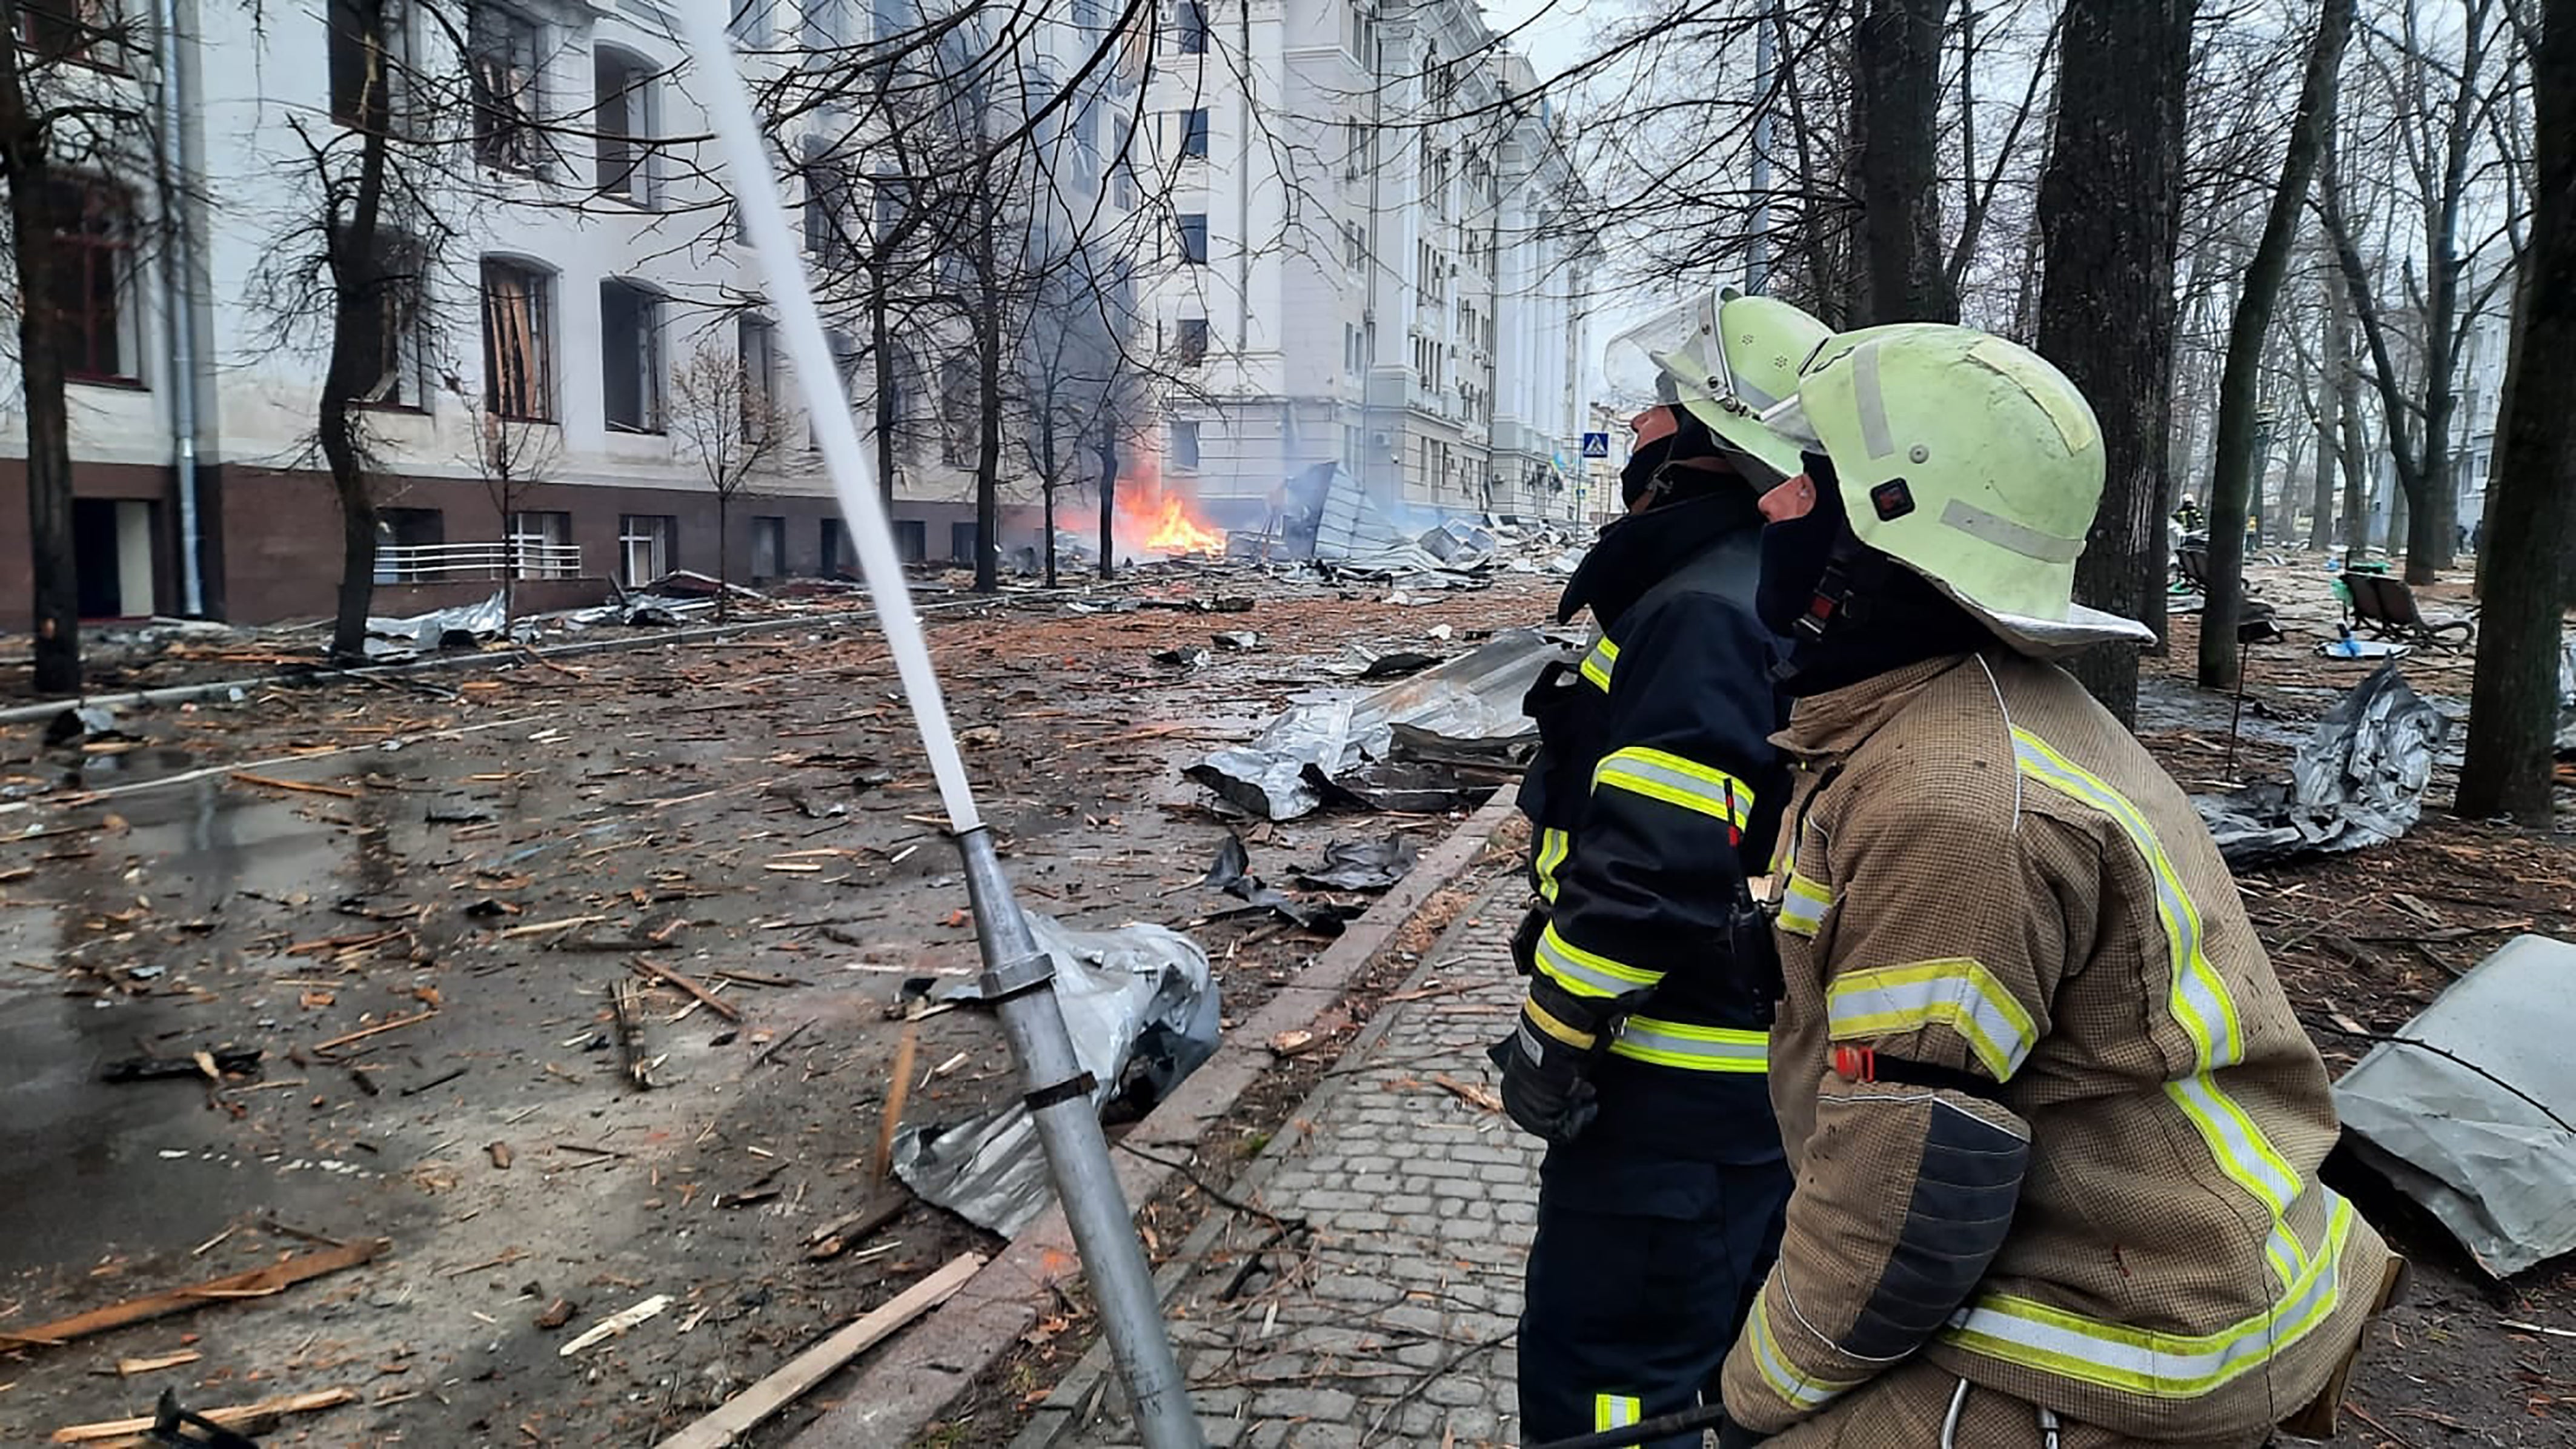 Firefighters tackling a blaze at a Kharkiv University faculty building caused by a Russian missile strike, according to the State Emergency Service of Ukraine